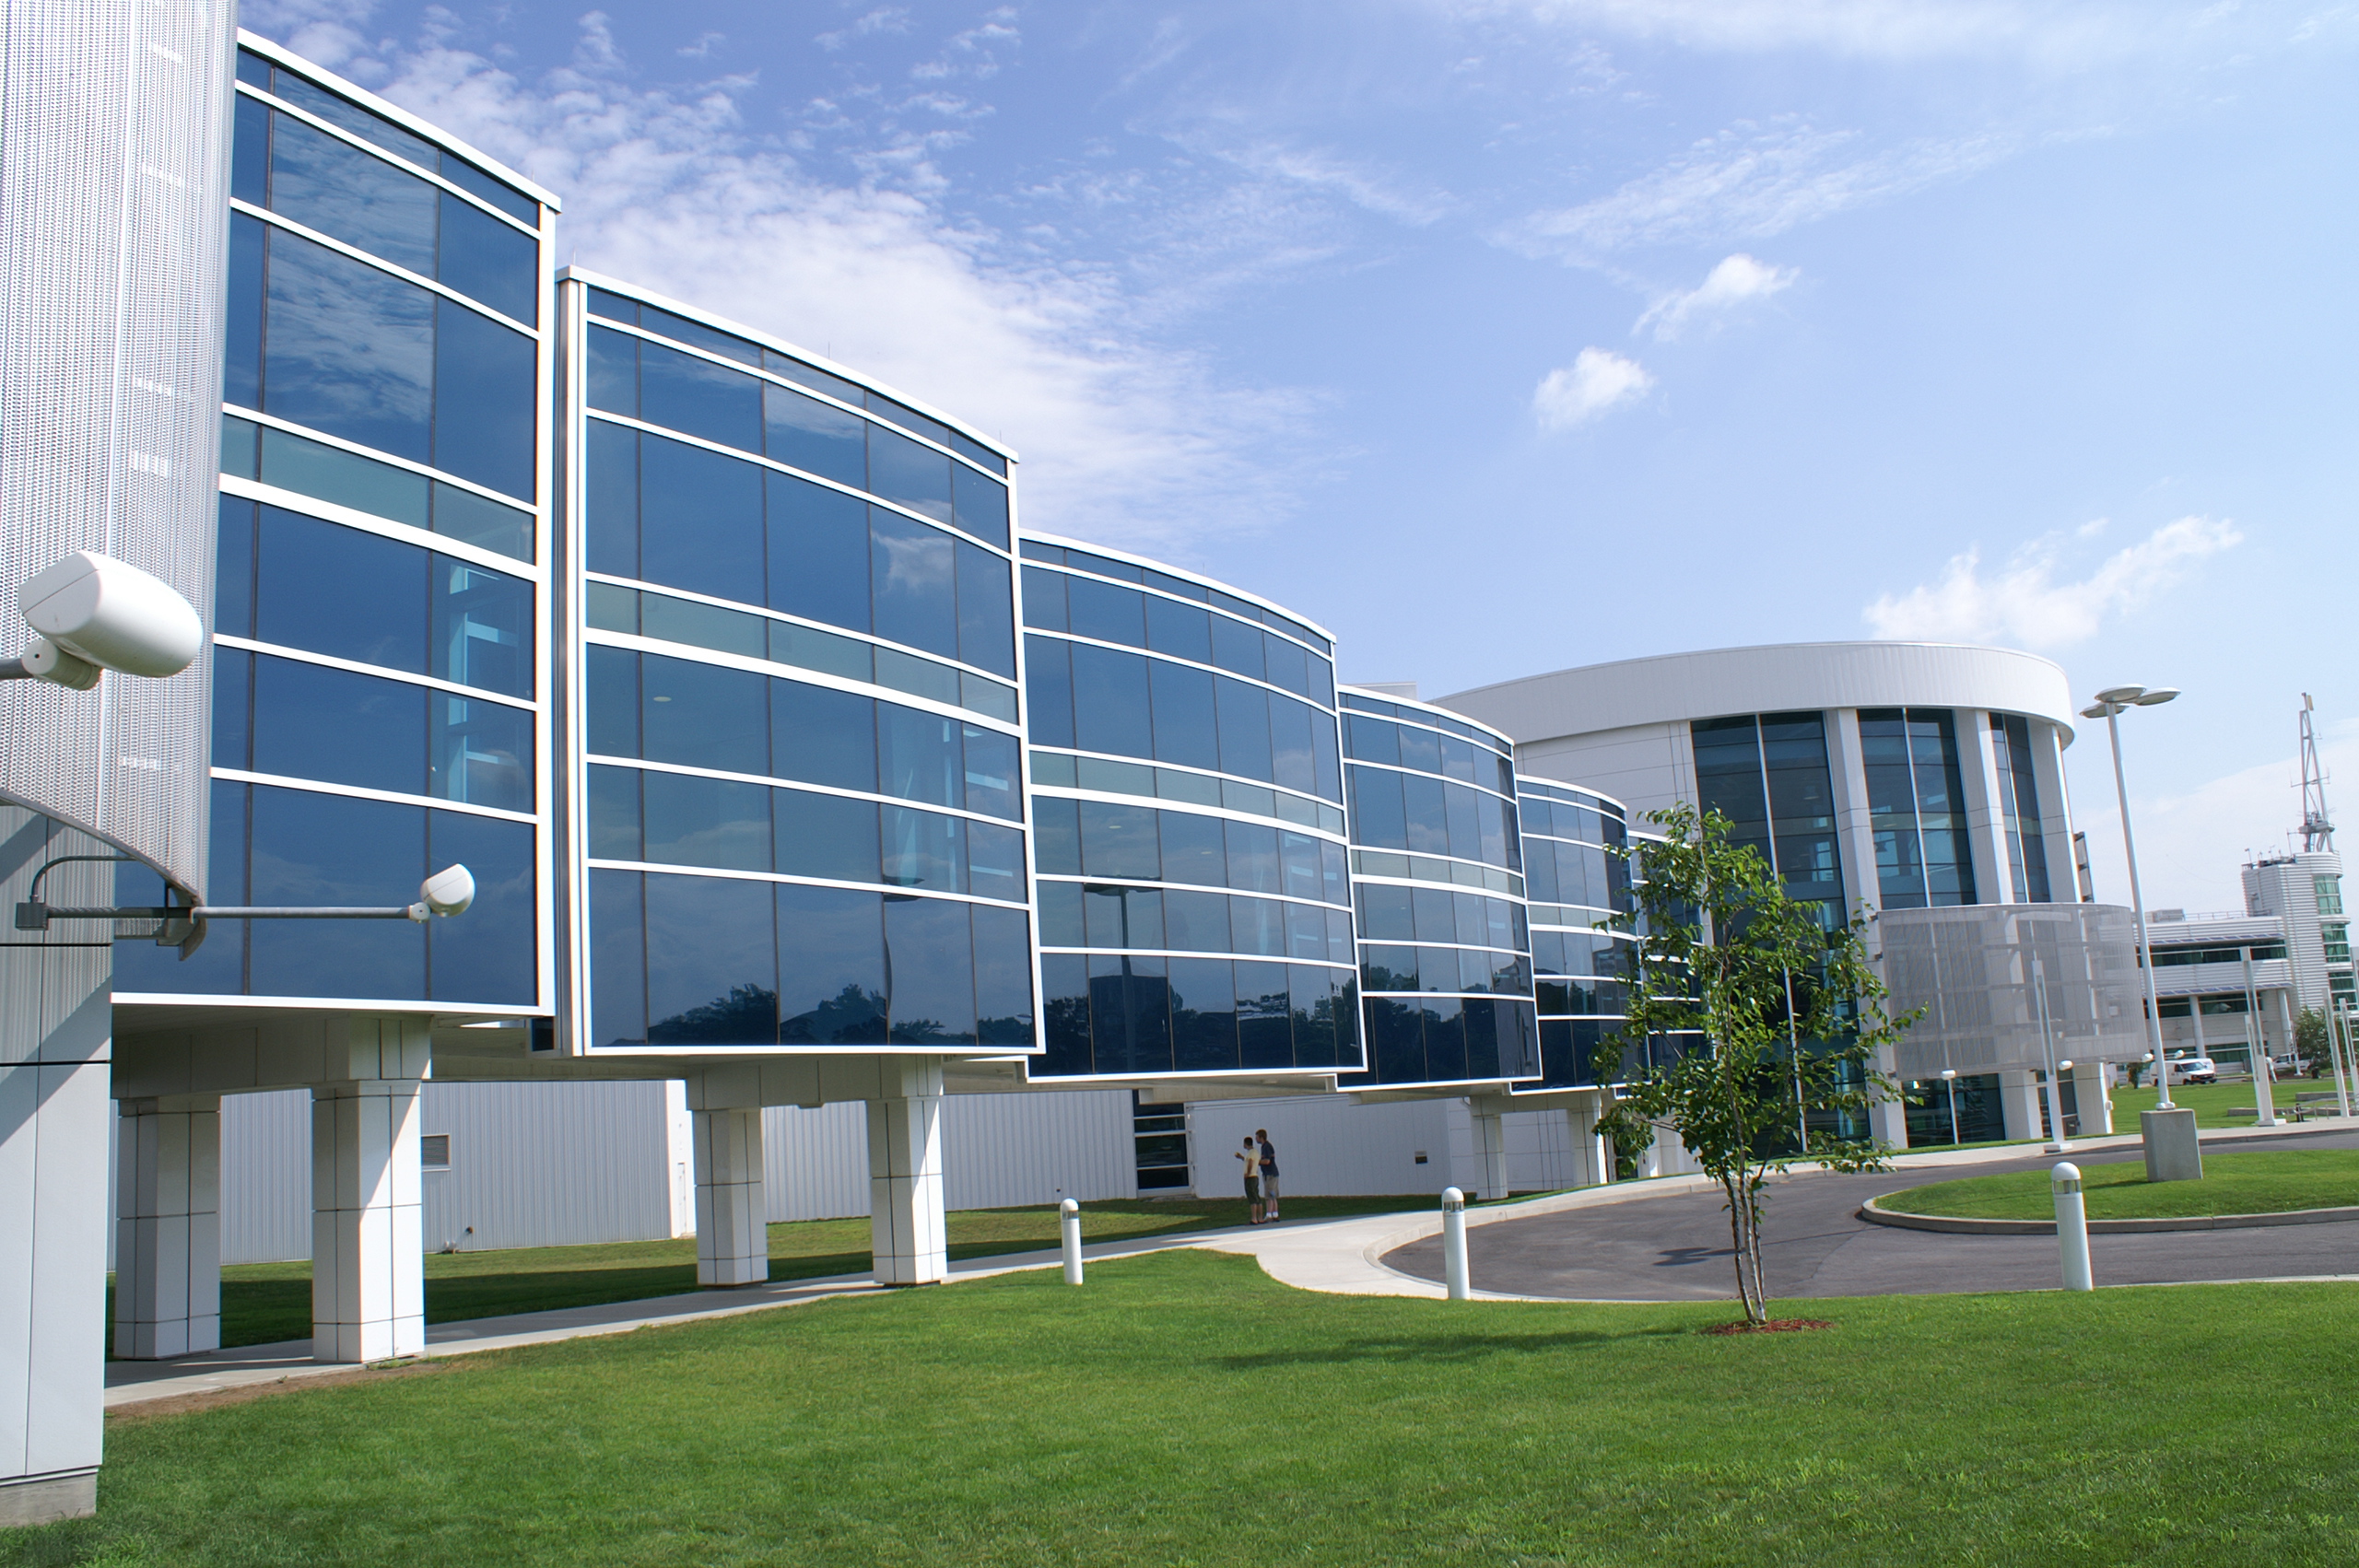 The CNSE campus, with multiple glass and steel buildings situated next to lush green lawn and a curved roadway.